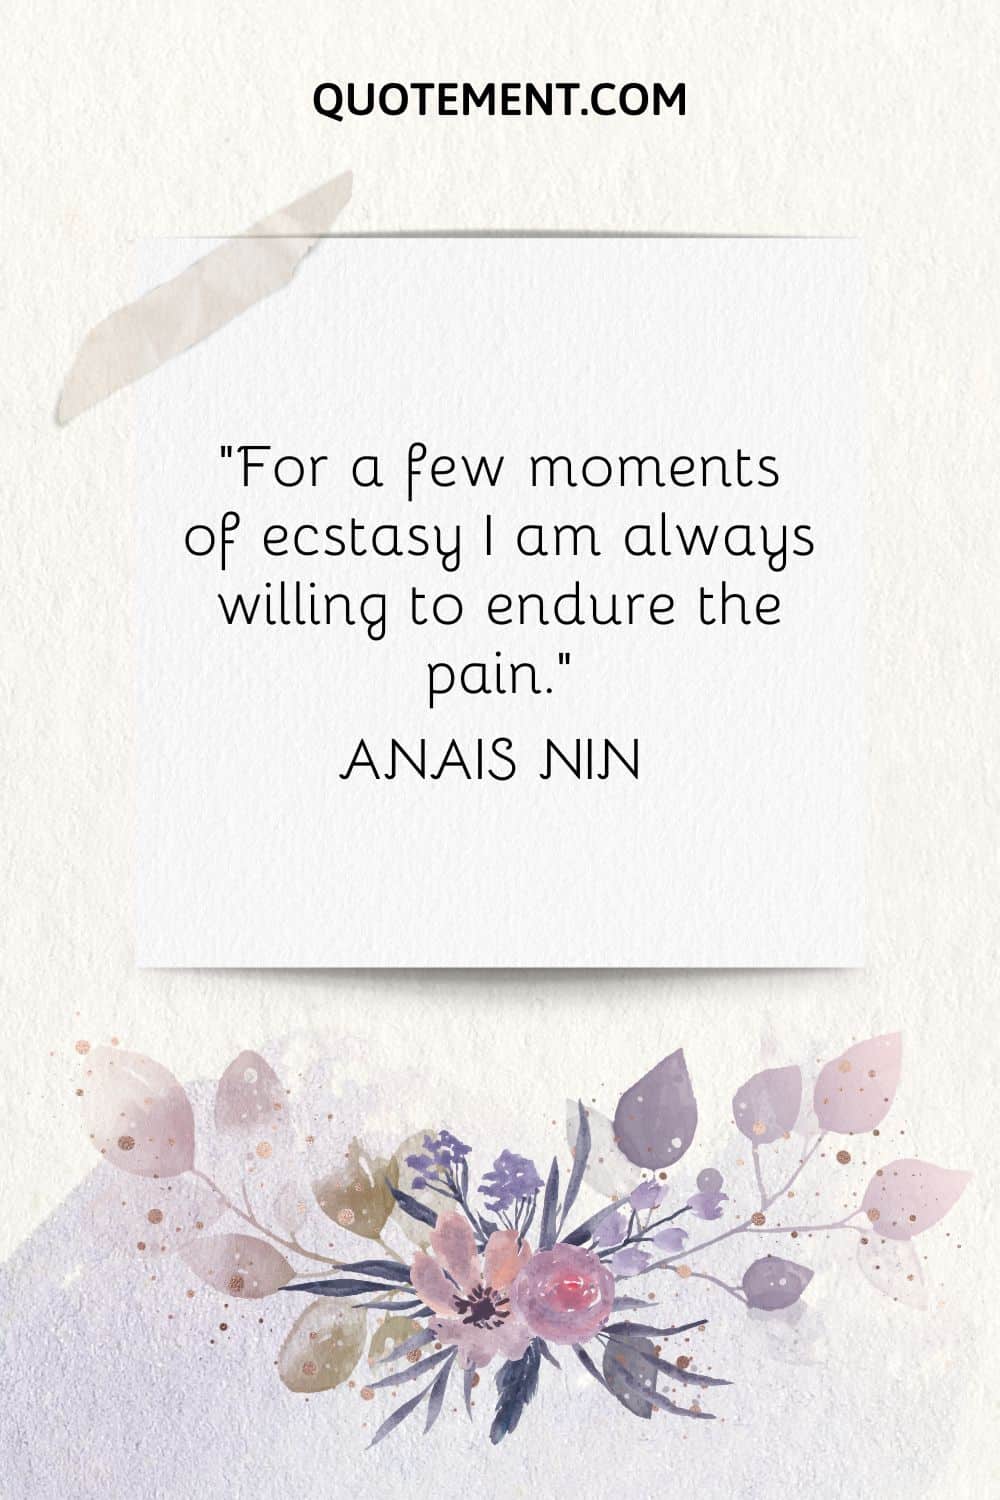 “For a few moments of ecstasy I am always willing to endure the pain.” — Anais Nin